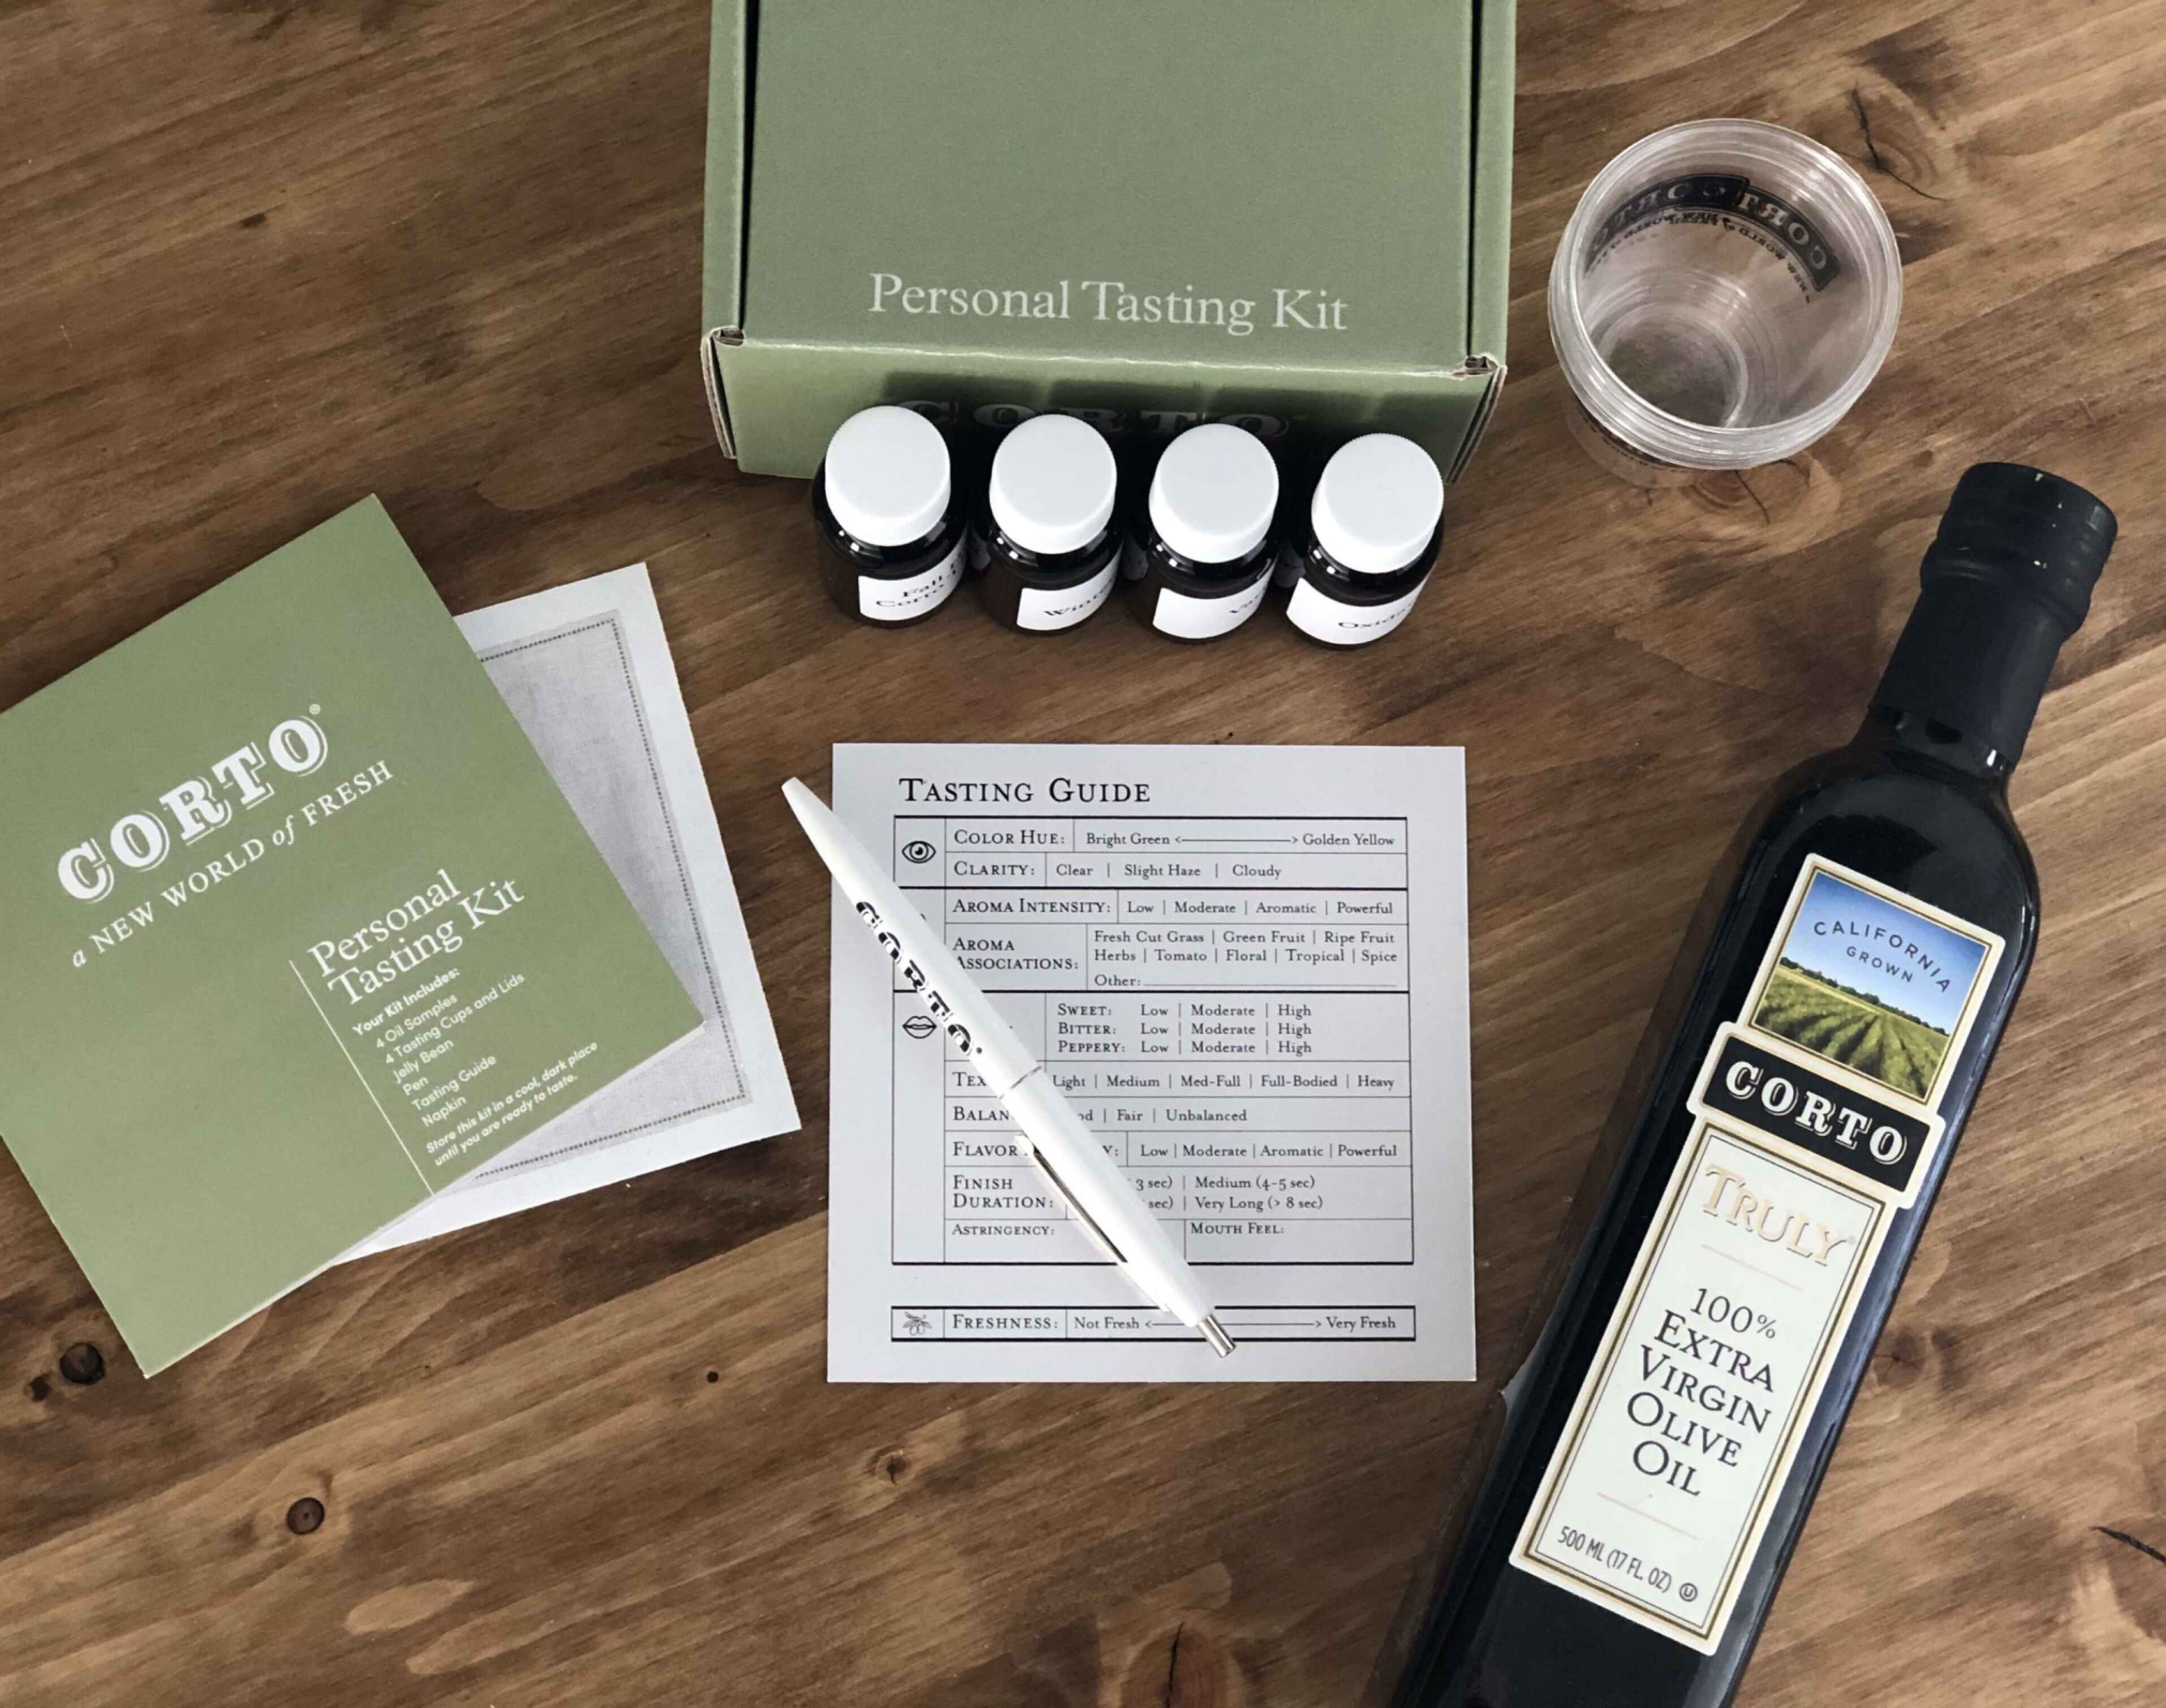 Corto Tasting Kit and Truly Bottle